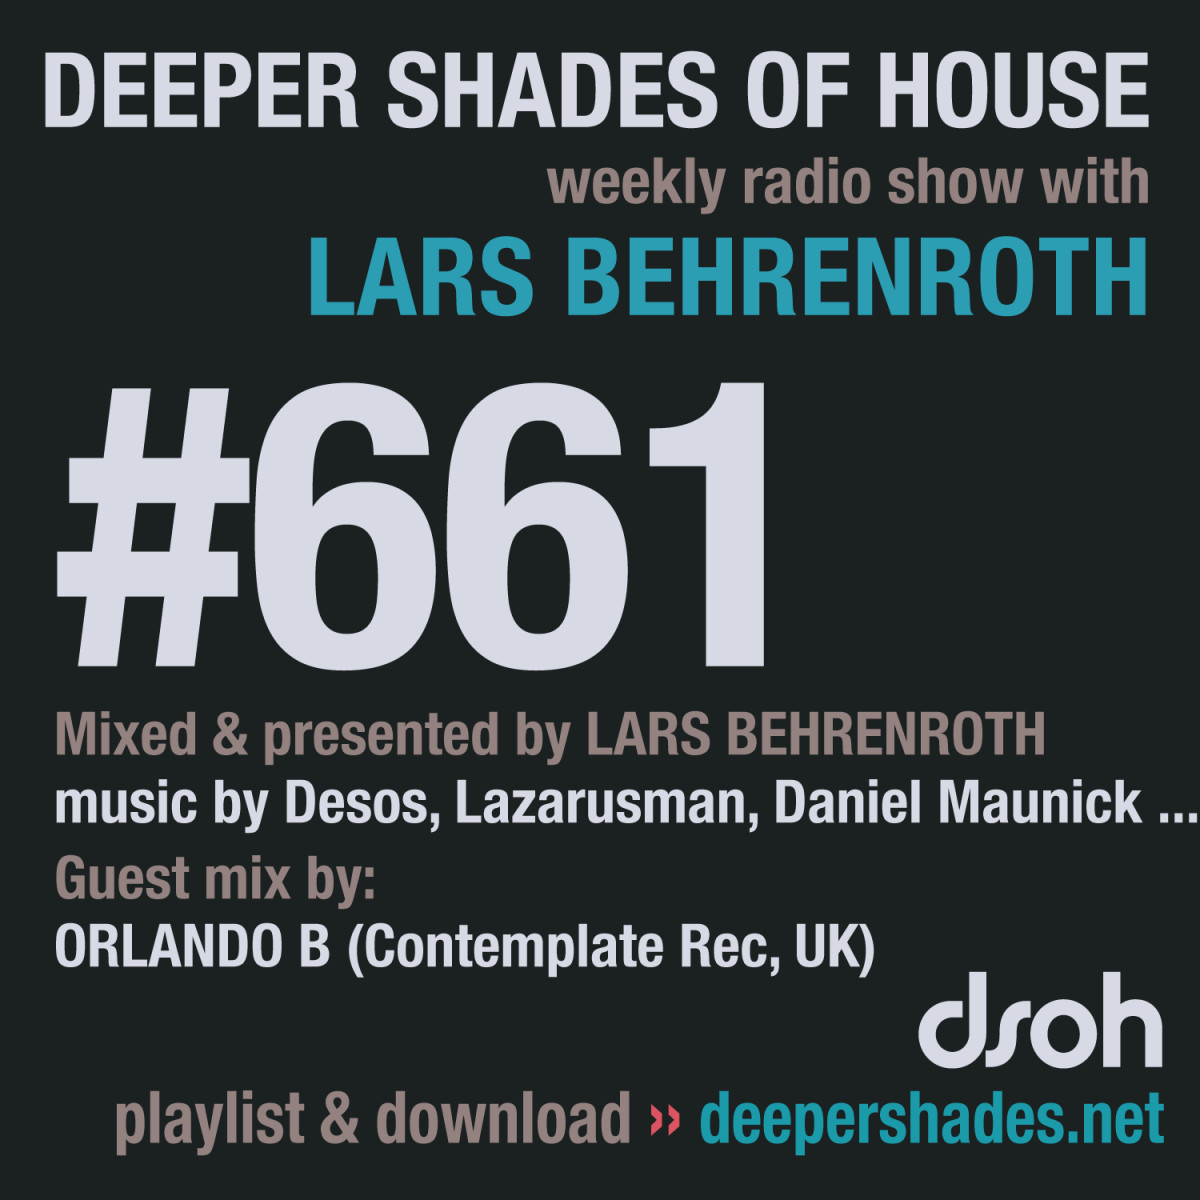 #nowplaying on radio.deepershades.net : Lars Behrenroth w/ exclusive guest mix by ORLANDO B (Contemplate Rec, UK) - DSOH #661 Deeper Shades Of House #deephouse #livestream #dsoh #housemusic